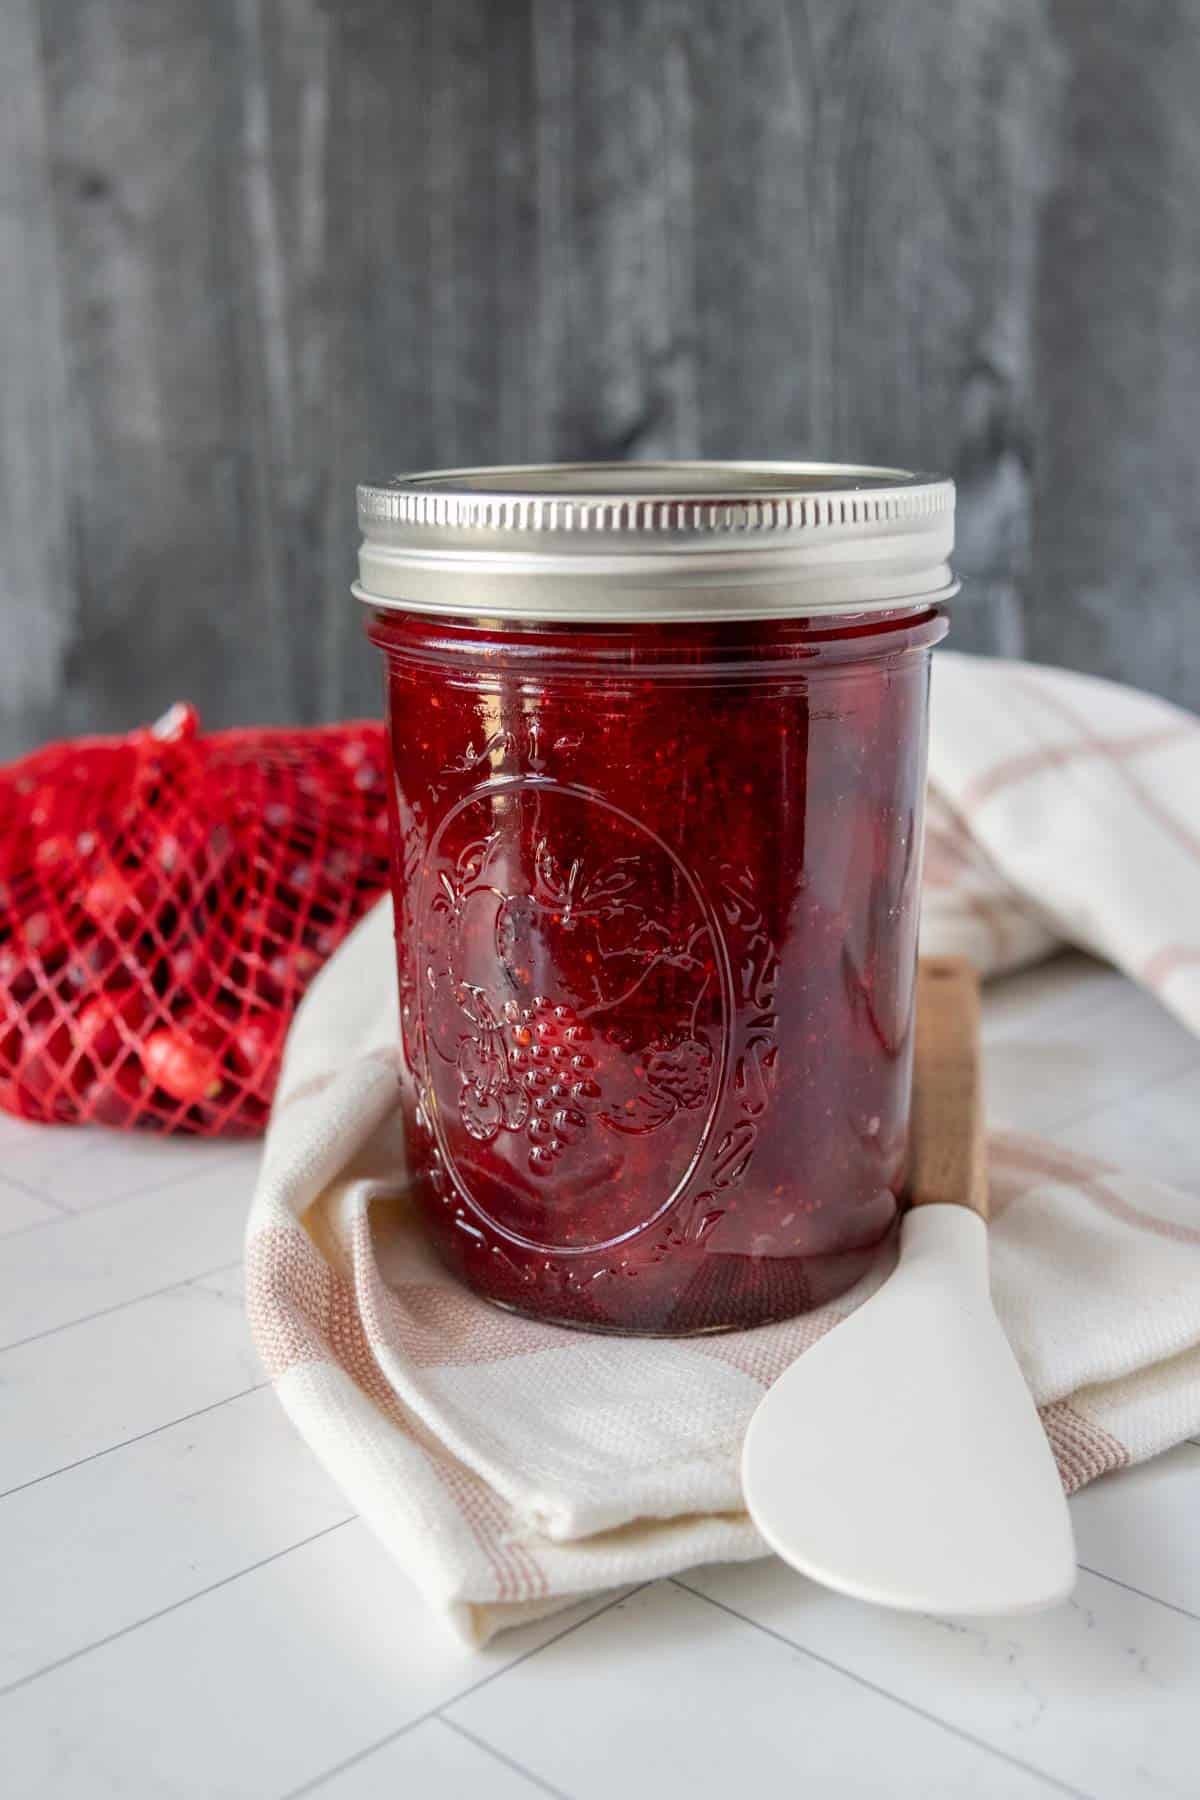 A jar of cranberry jam with a spoon next to it.